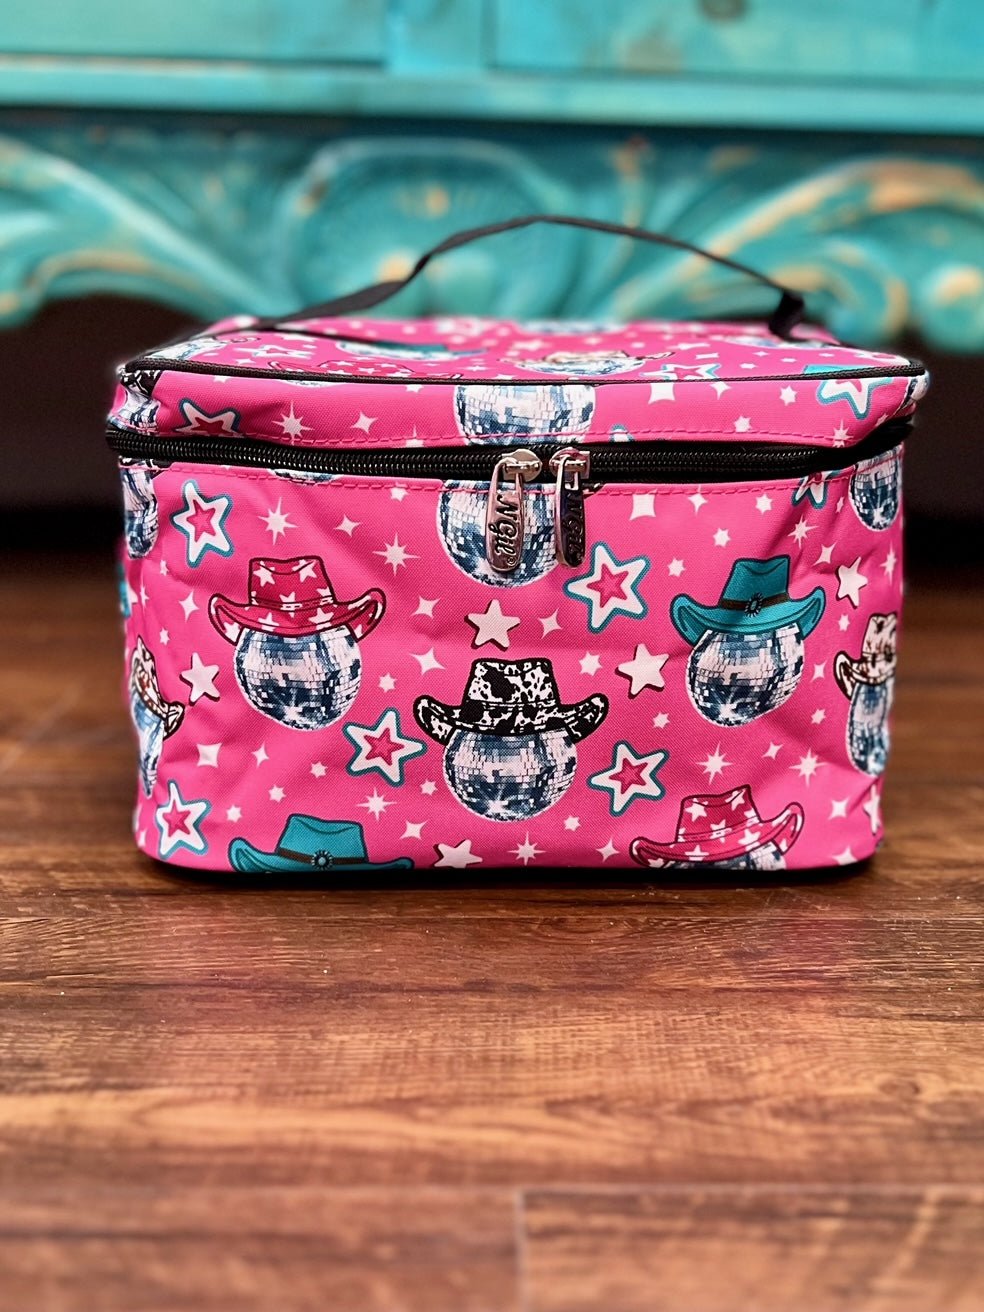 The Disco Cowgirl Large Cosmetic Case